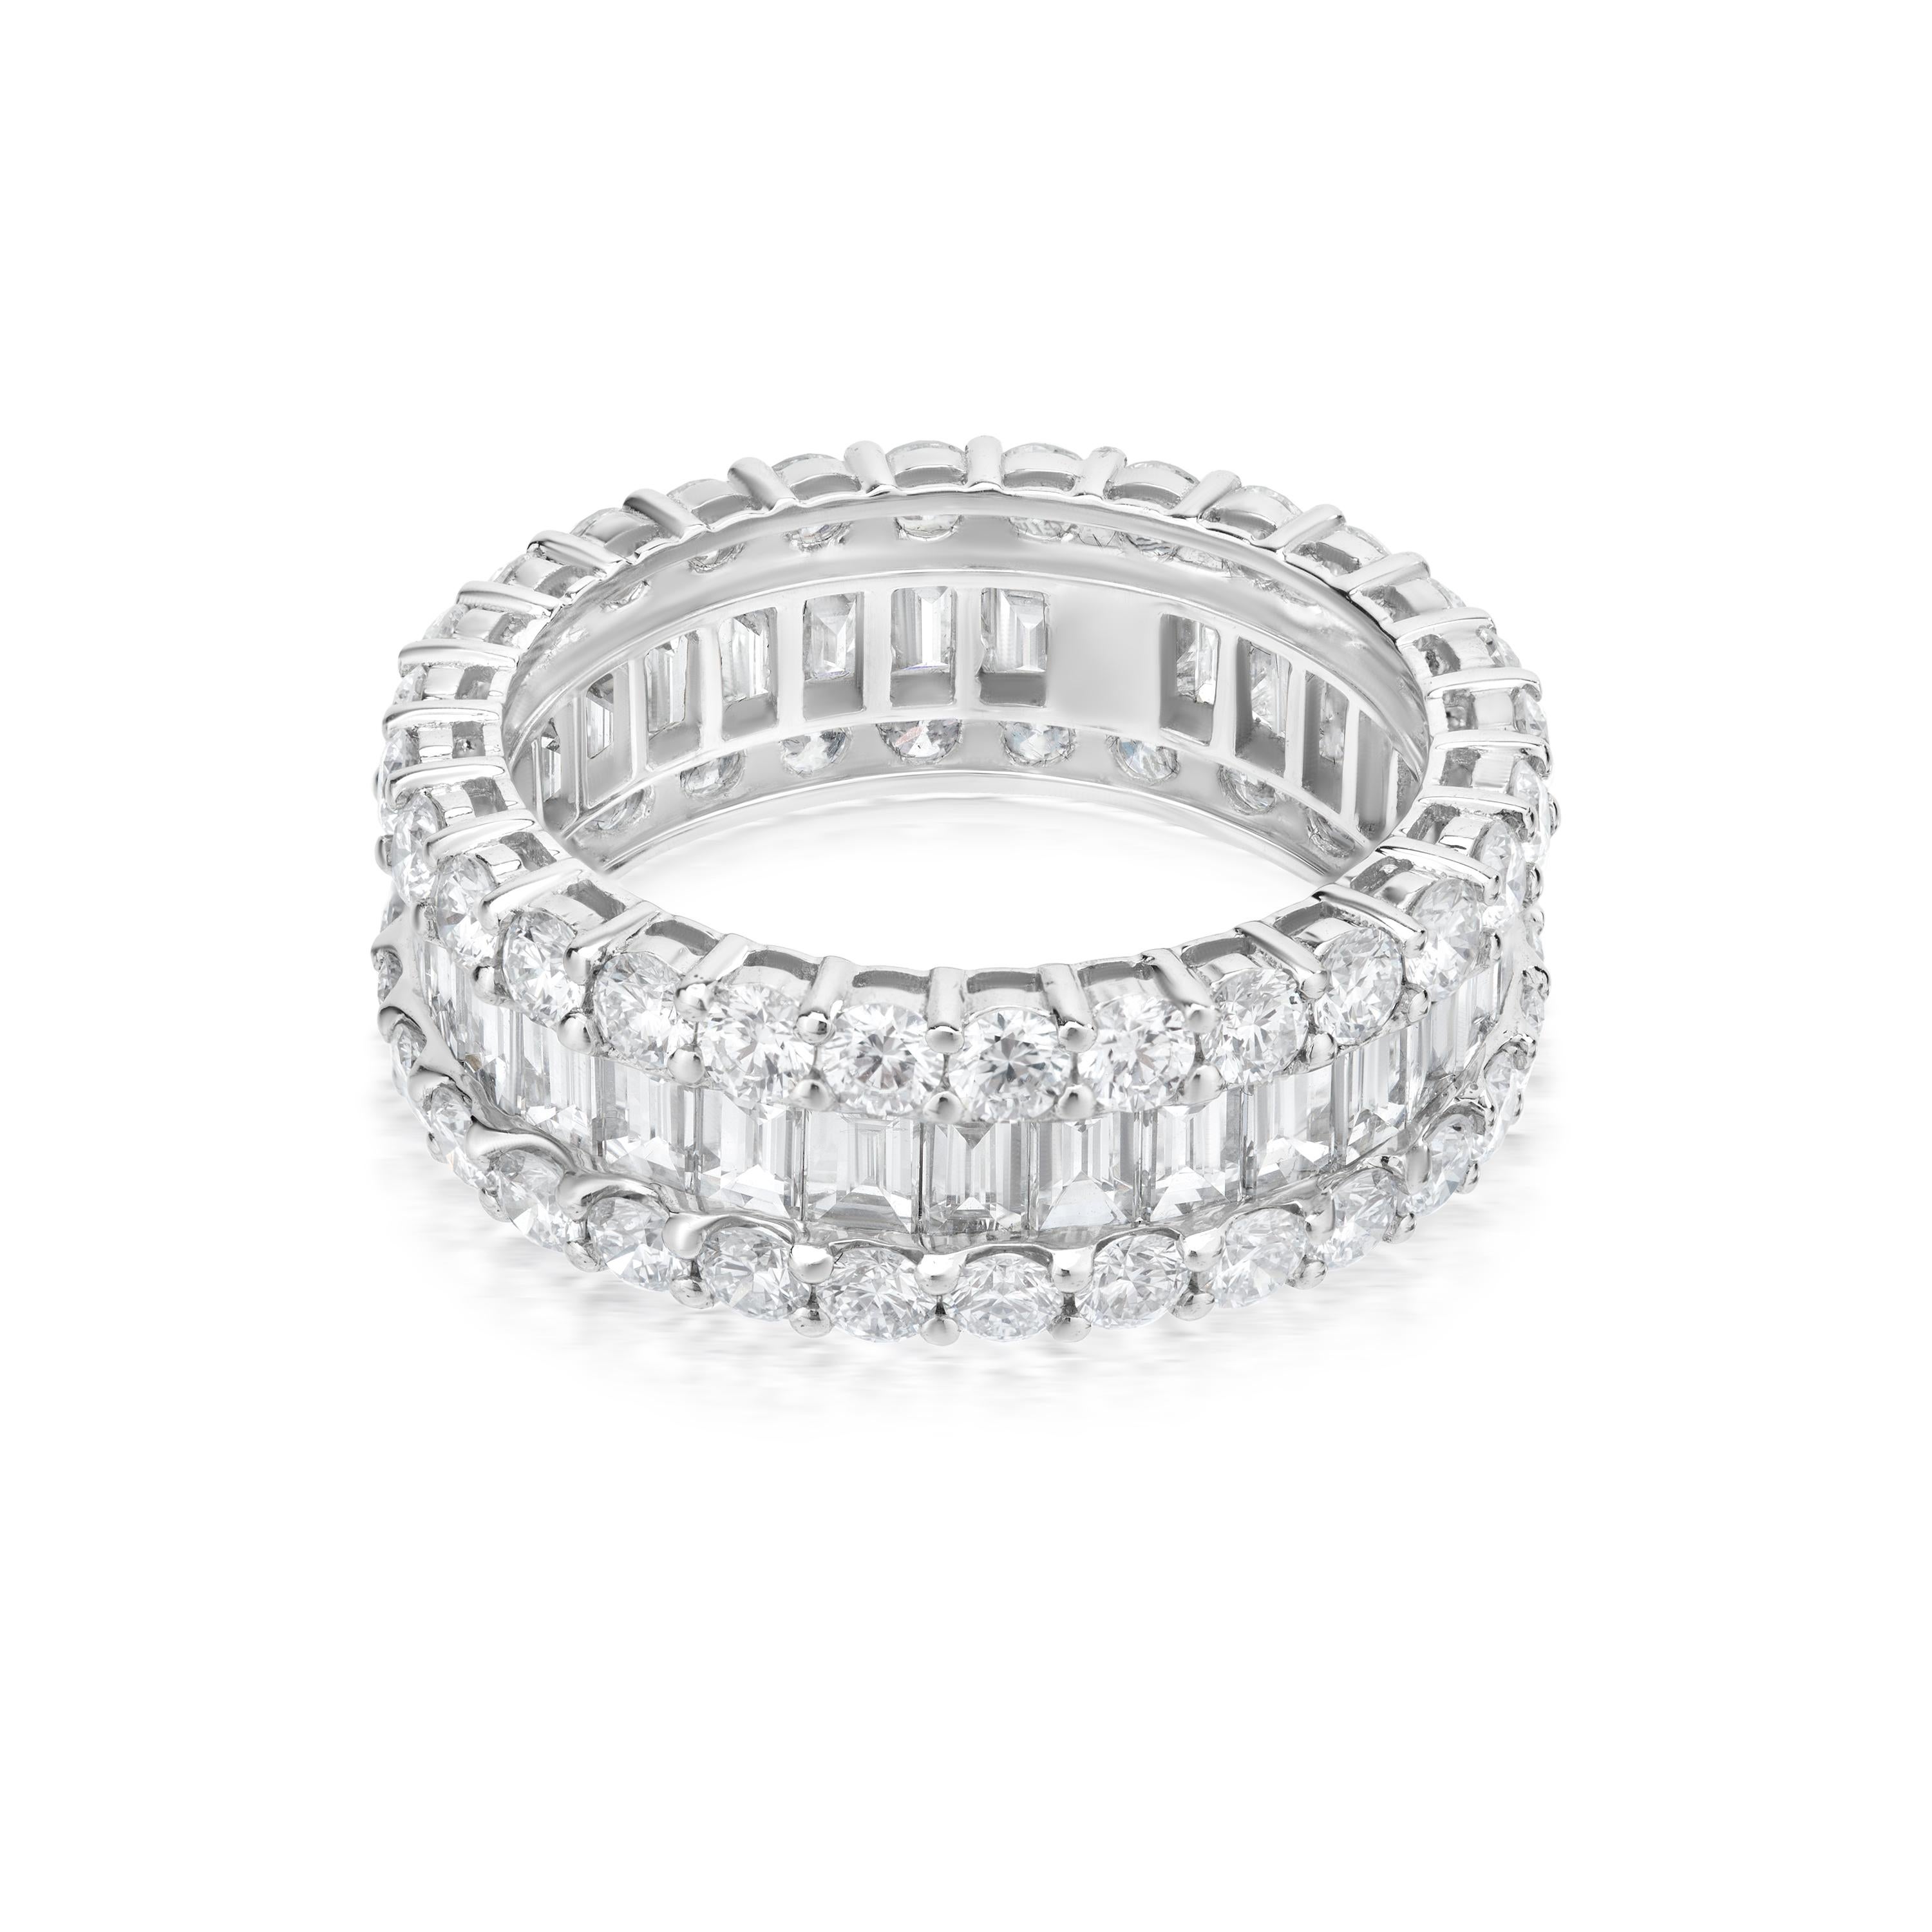 Mounted on 18k White gold By Nigaam this diamond band ring features a channel of baguette diamonds set amidst twin circular rows of prong set round brilliant diamonds. The round full-cut diamonds are VS1 in clarity FG in color. This white gold band